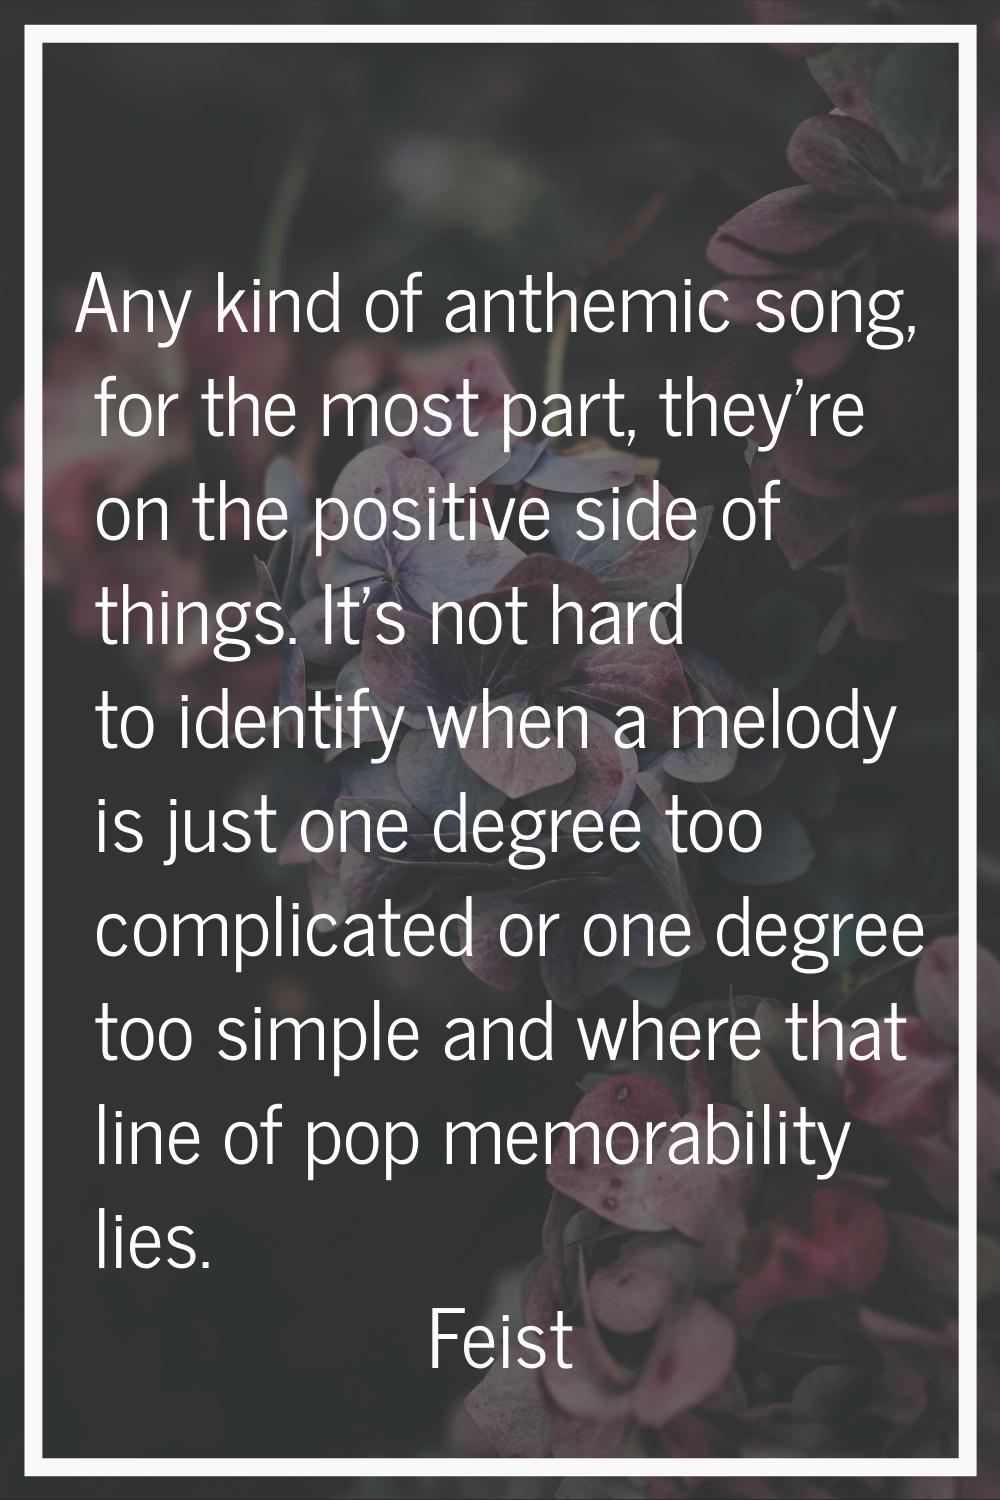 Any kind of anthemic song, for the most part, they're on the positive side of things. It's not hard